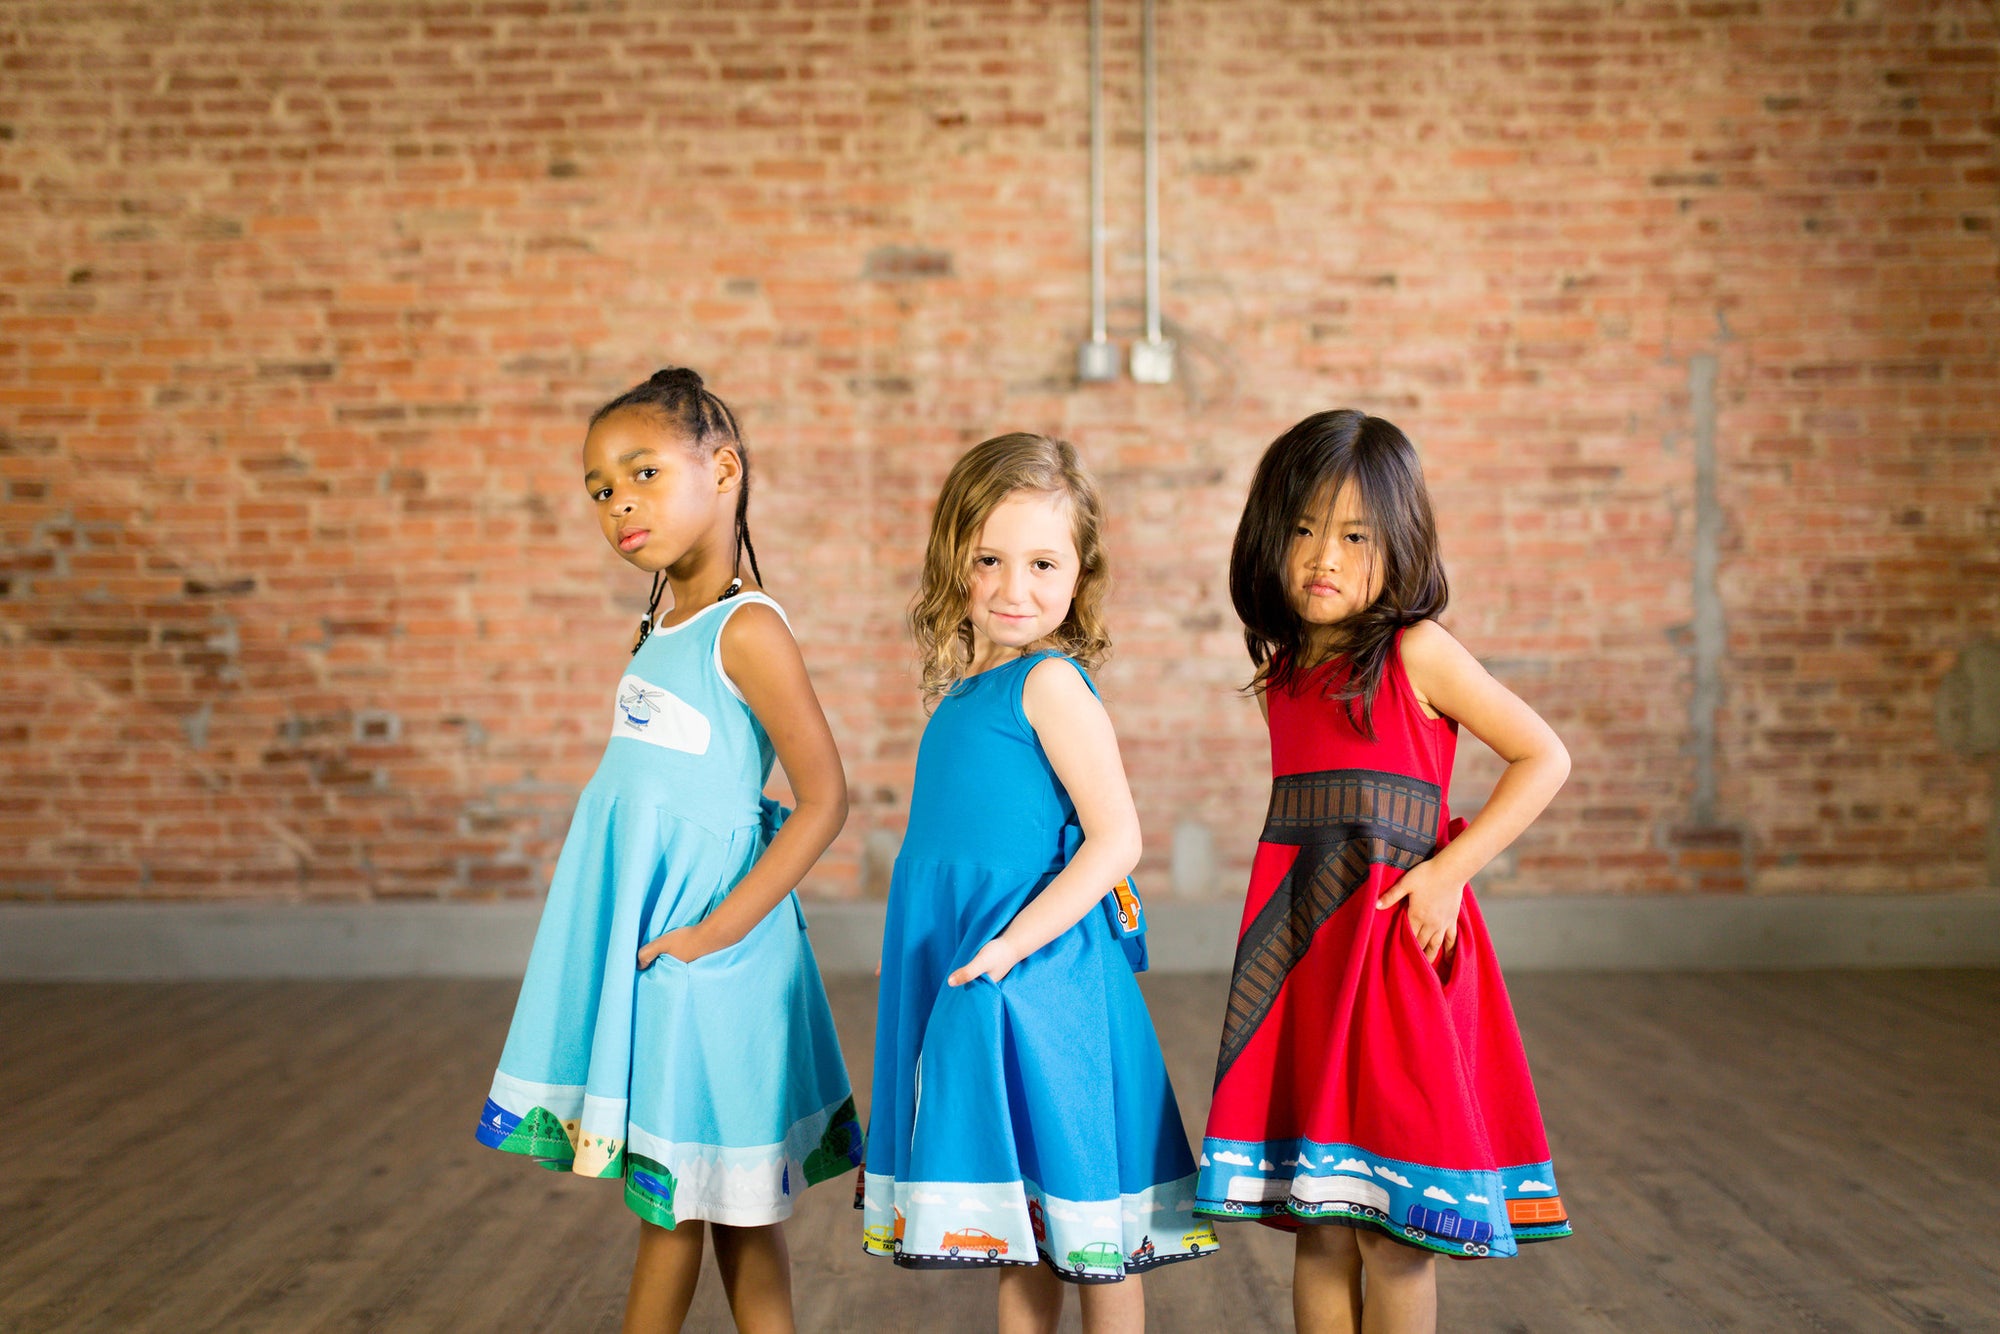 The Busy Dresses - The First Ever "Play-able" Dress